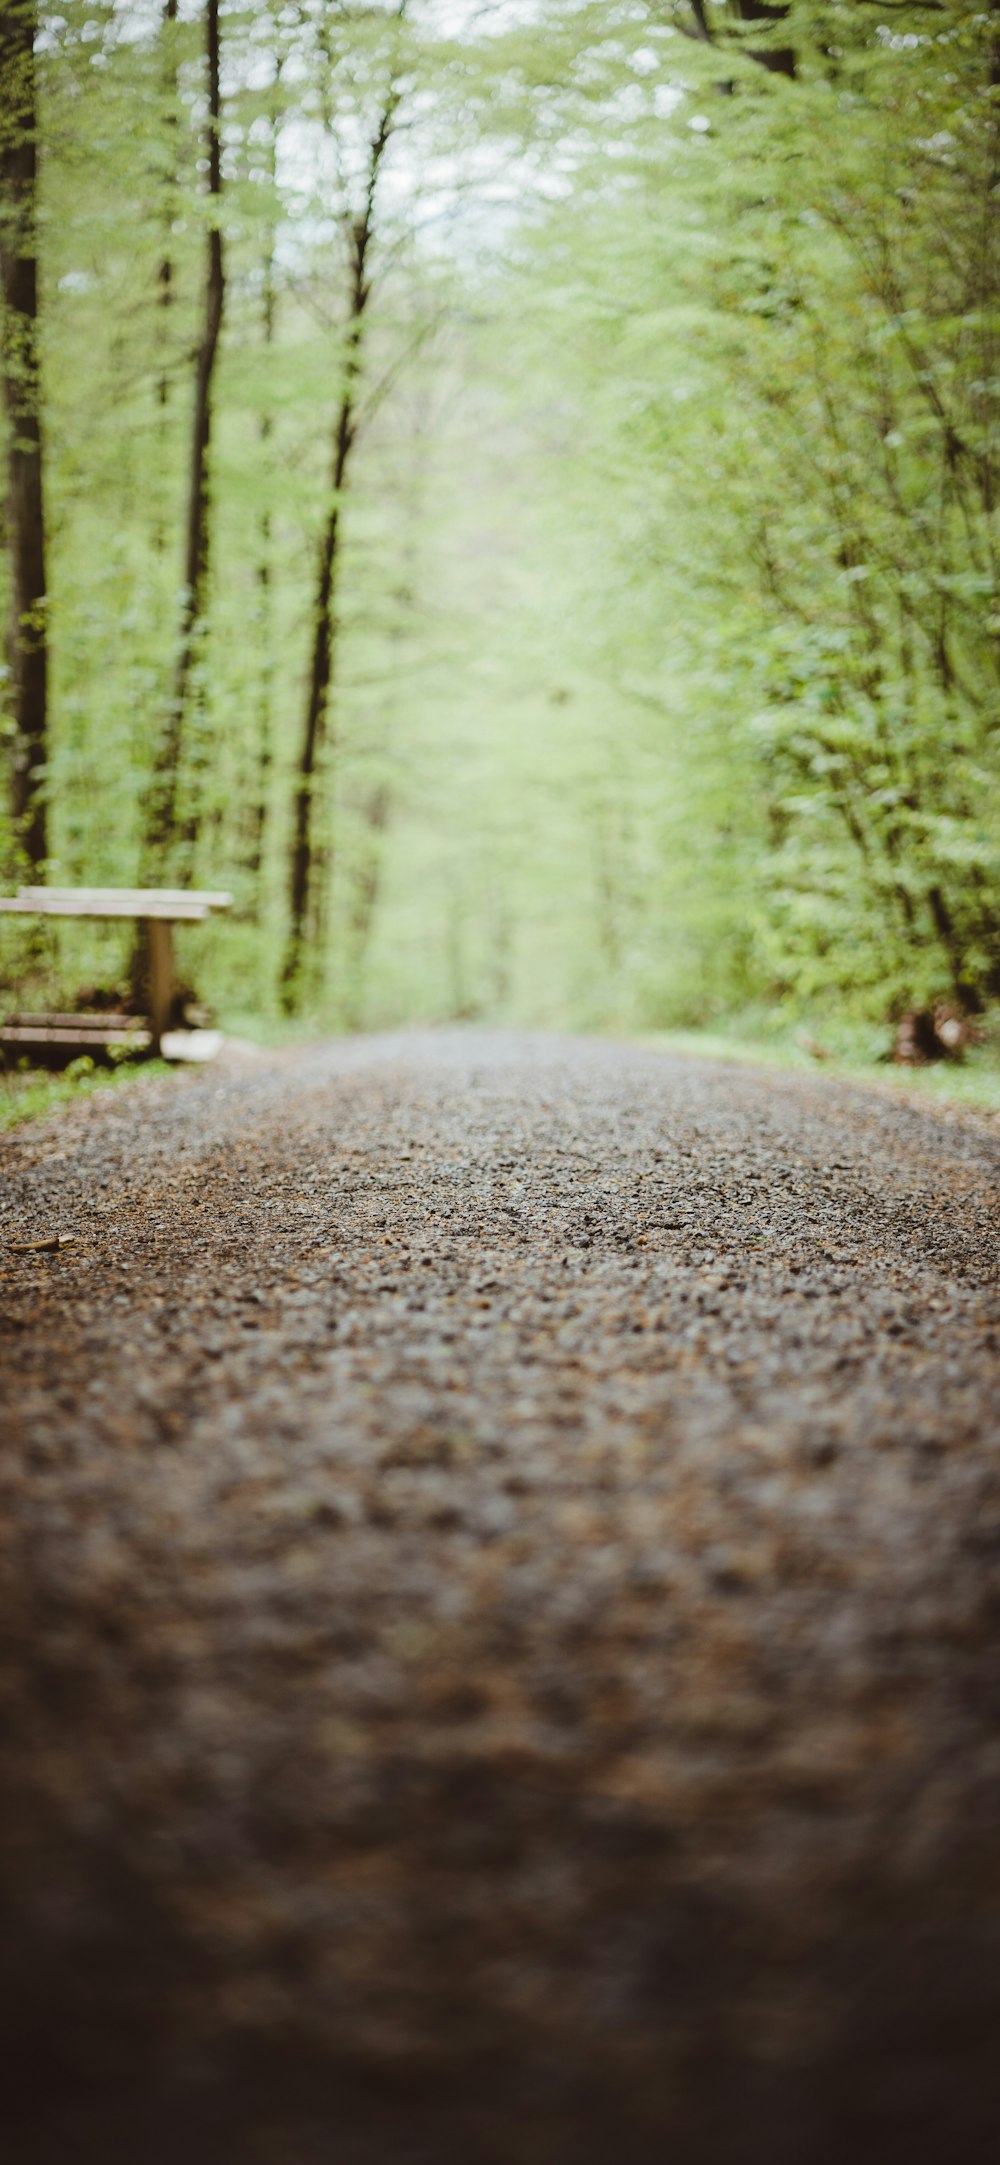 brown wooden bench on brown dirt road photo – Free Germany Image on Unsplash